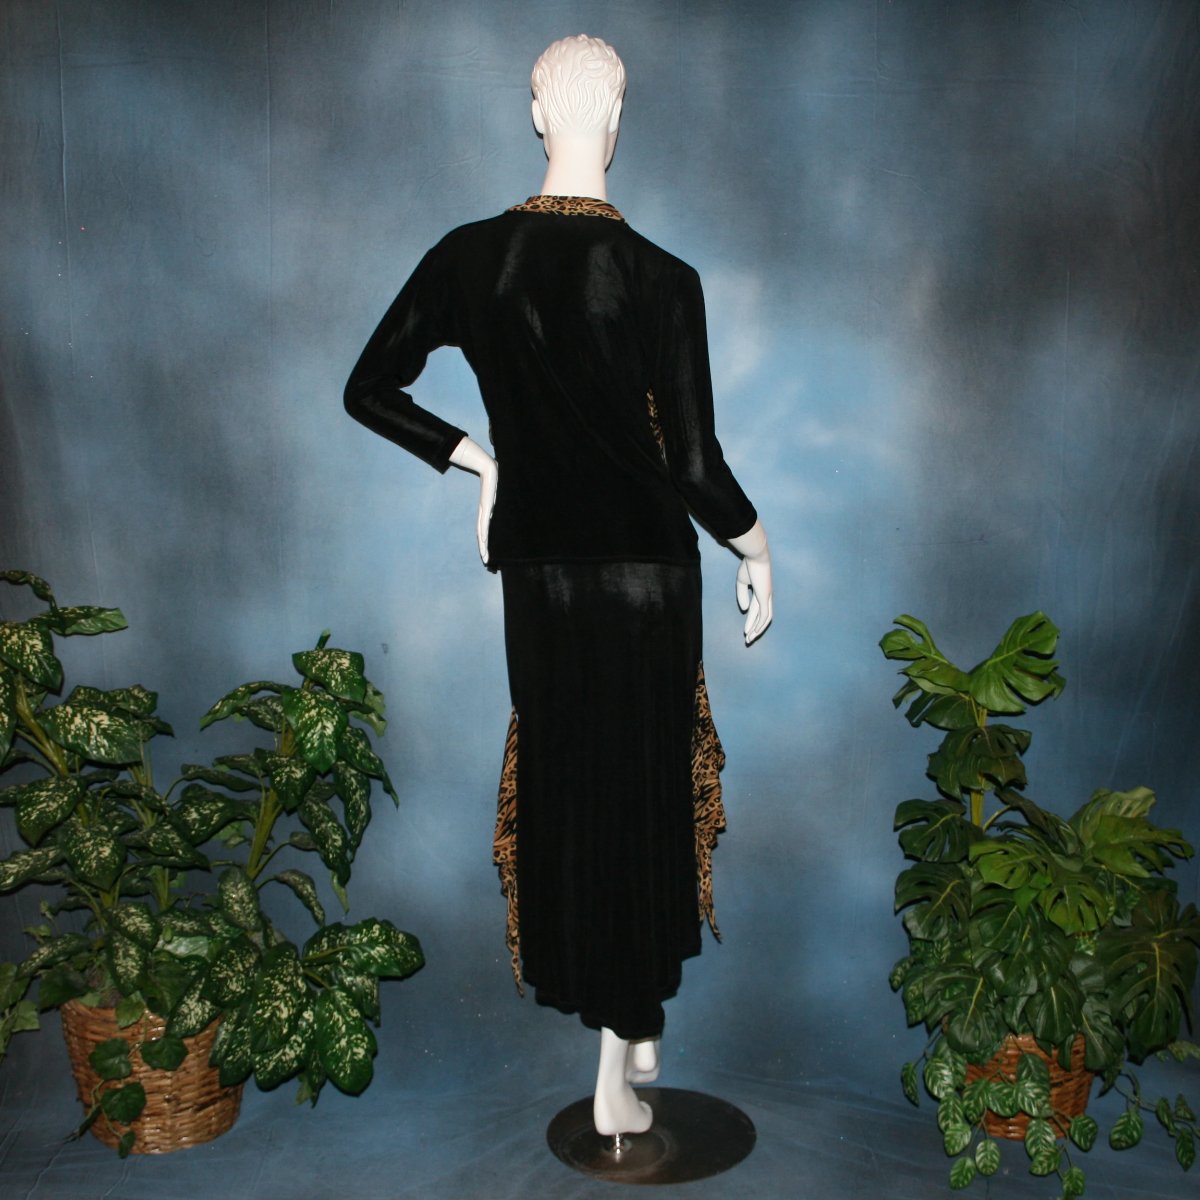 back view of Black ballroom dance top with cheetah ruffly neck & tie of luxurious black slinky and black Latin/rhythm flaired skirt with cheetah print slinky ruffly accents, which drapes down longer in the back. Great set for ballroom teachers!Tie on top can be worn open or closed.